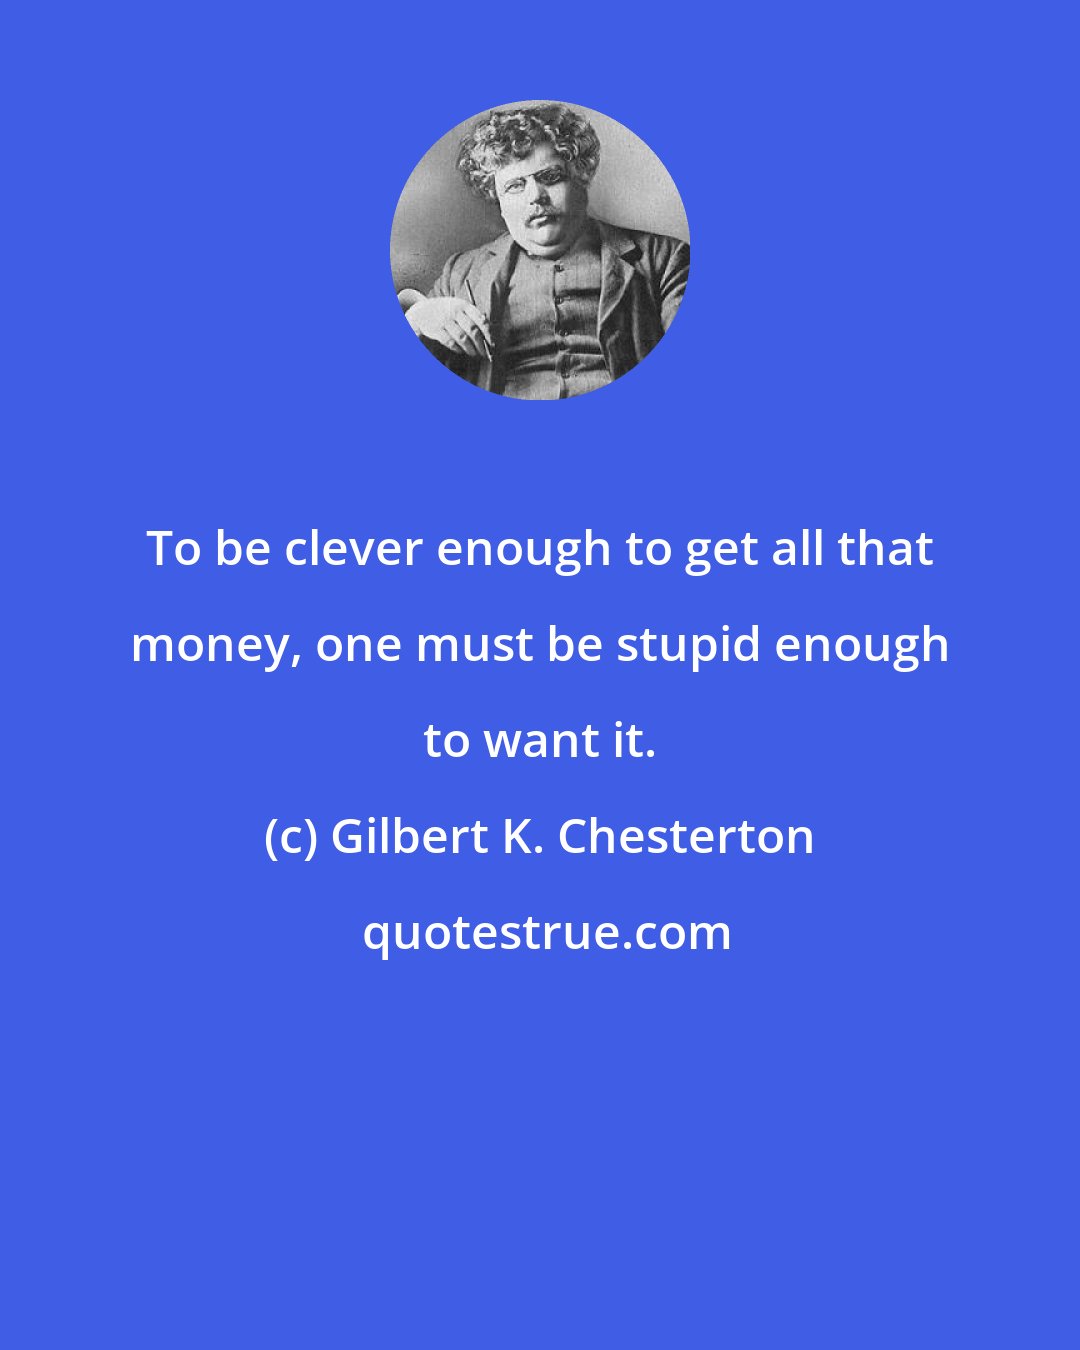 Gilbert K. Chesterton: To be clever enough to get all that money, one must be stupid enough to want it.